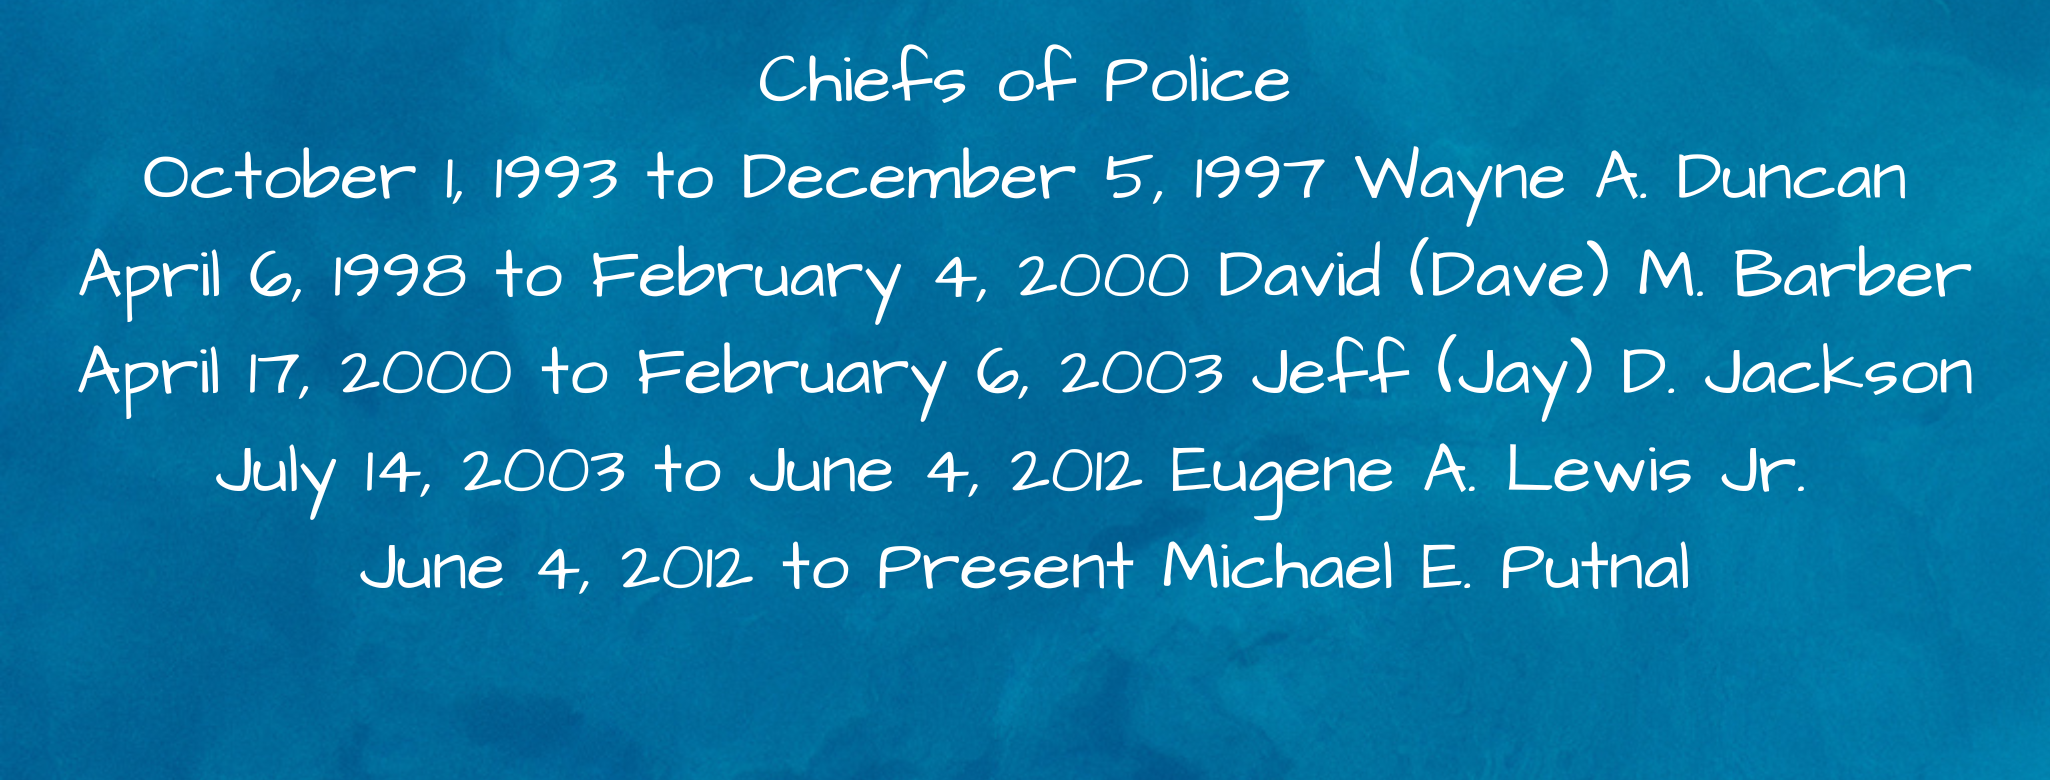 10/1/93 to 12/5/97 Wayne A. Duncan, 4/6/98 to 2/4/00 David M. Barber, 4/17/00 to 2/06/03 Jeff D. Jackson, 7/14/03 to 6/4/12 Eugene A. Lewis Jr, 6/4/12 to present Michael E. Putnal